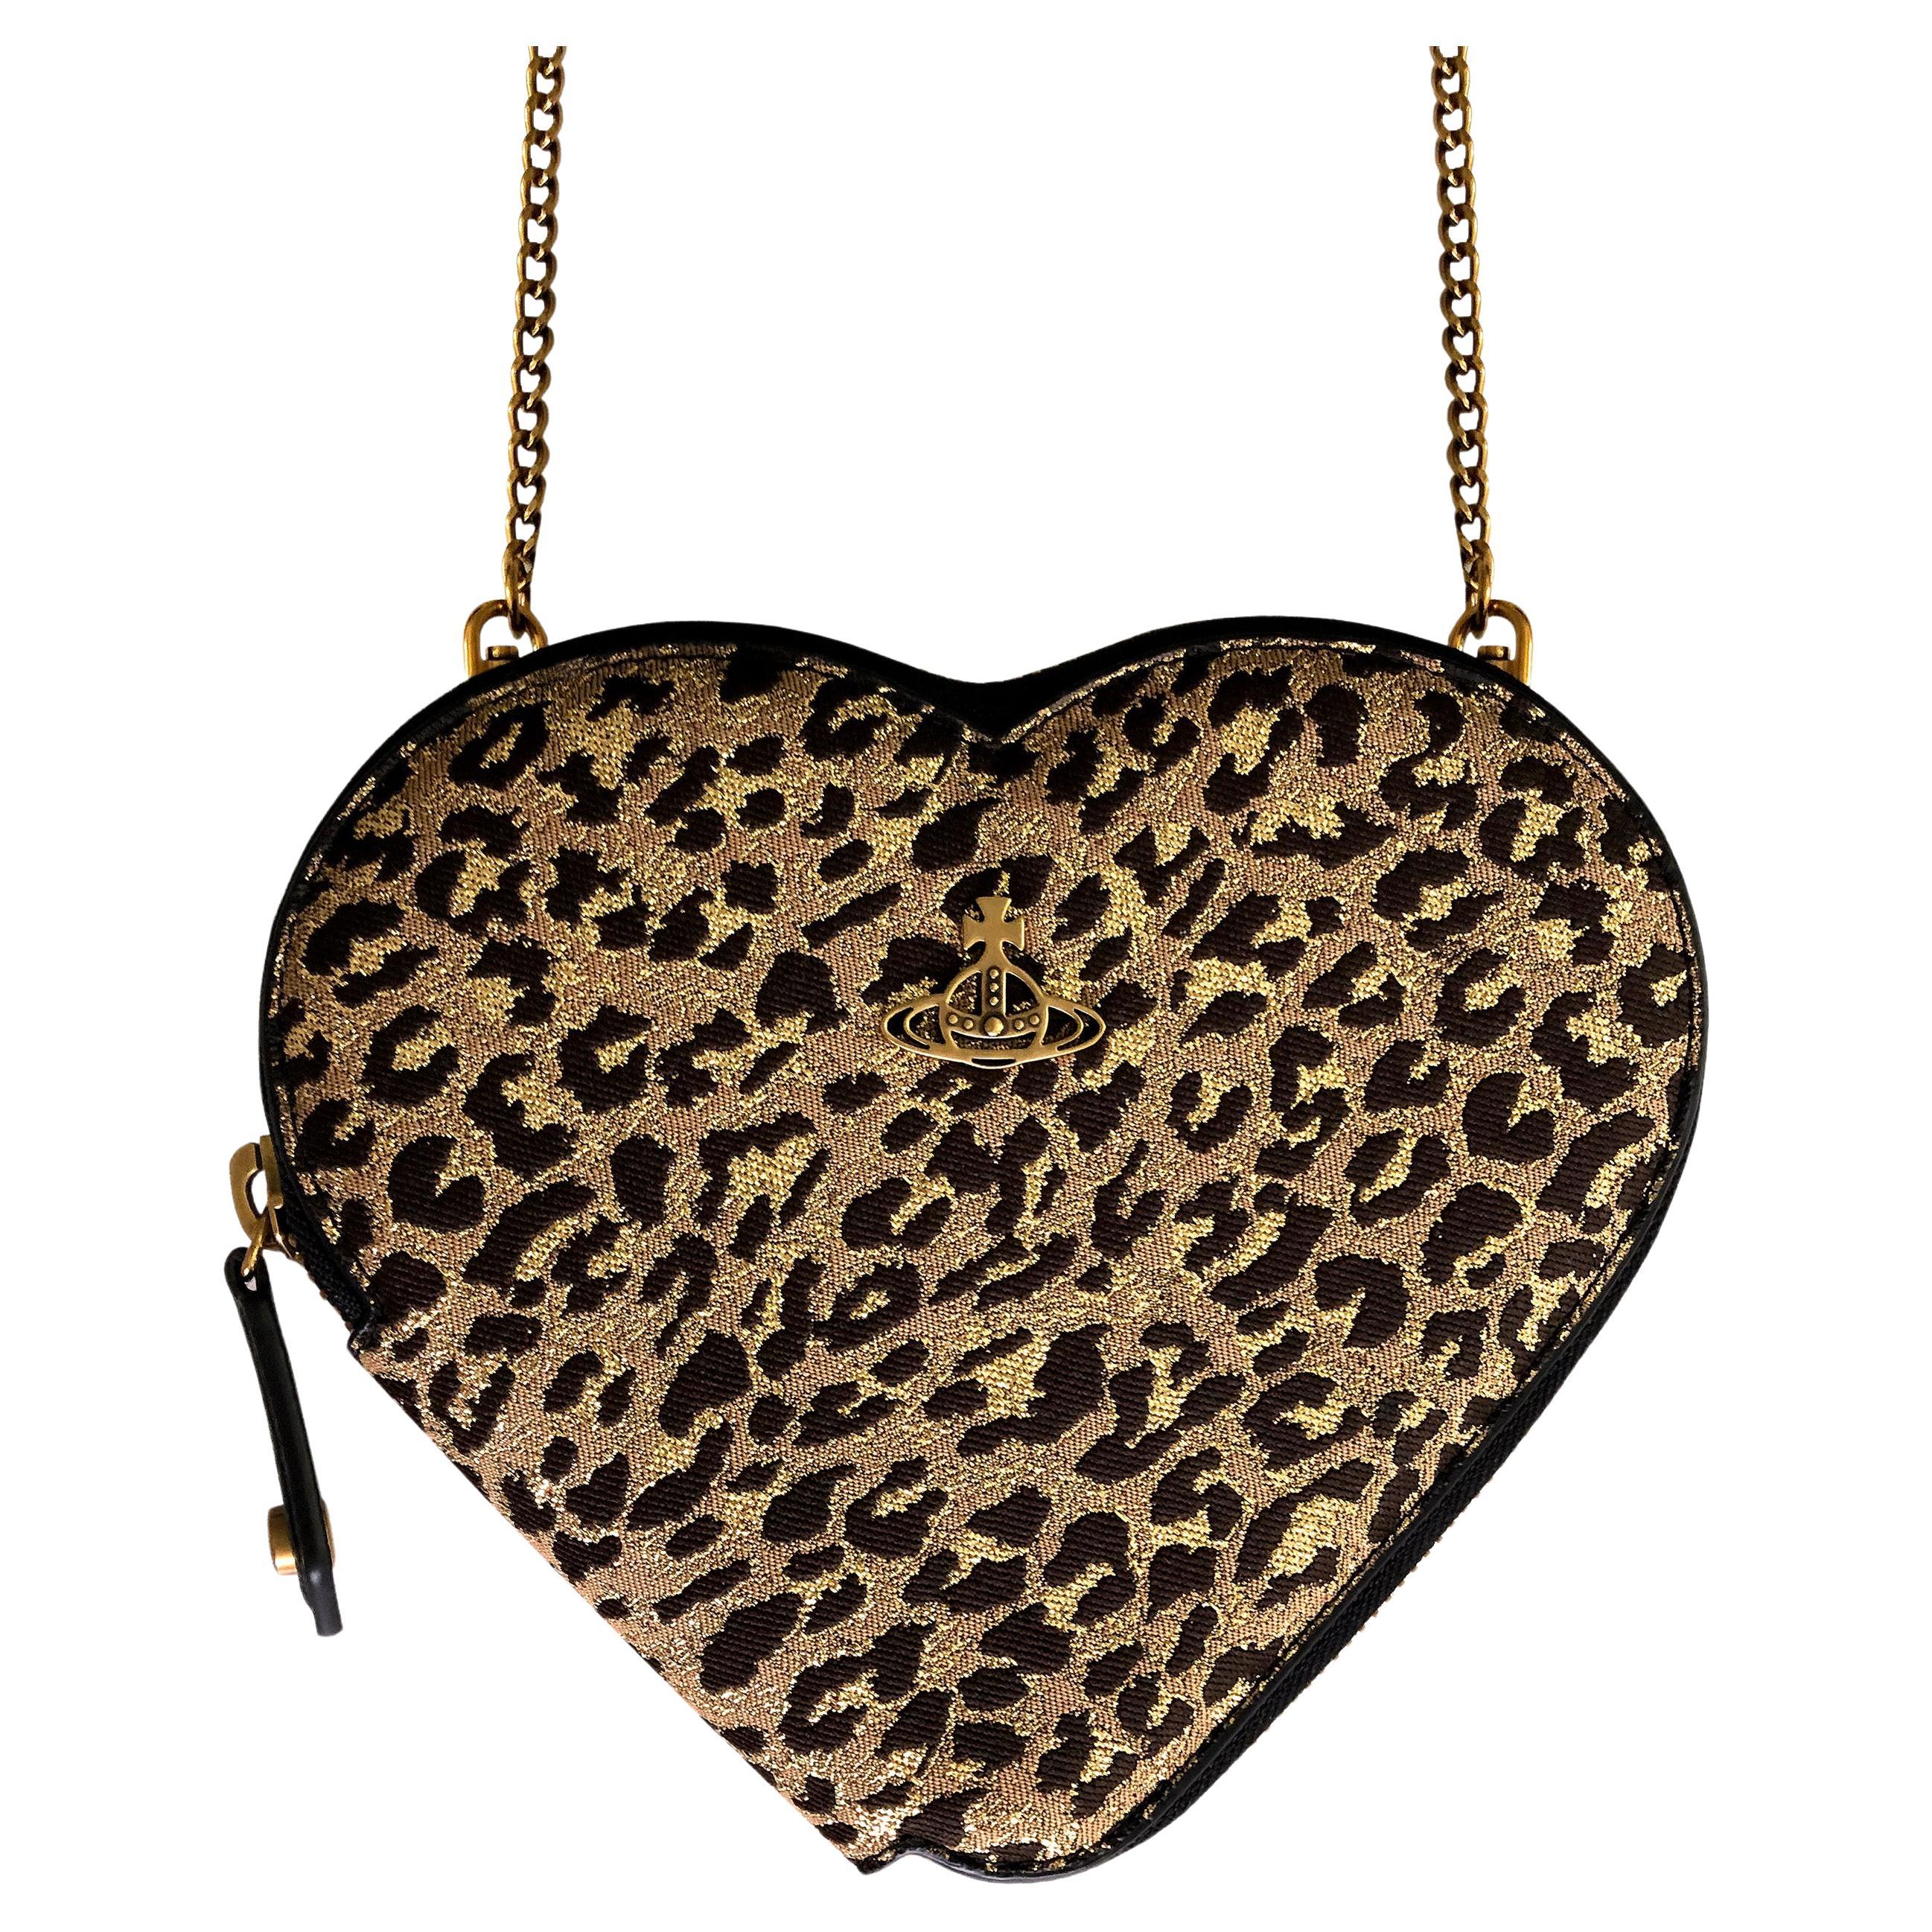 Vivienne Westwood - Heart Crossbody Bag - Gold Leopard Jacquard - NEW With Tags